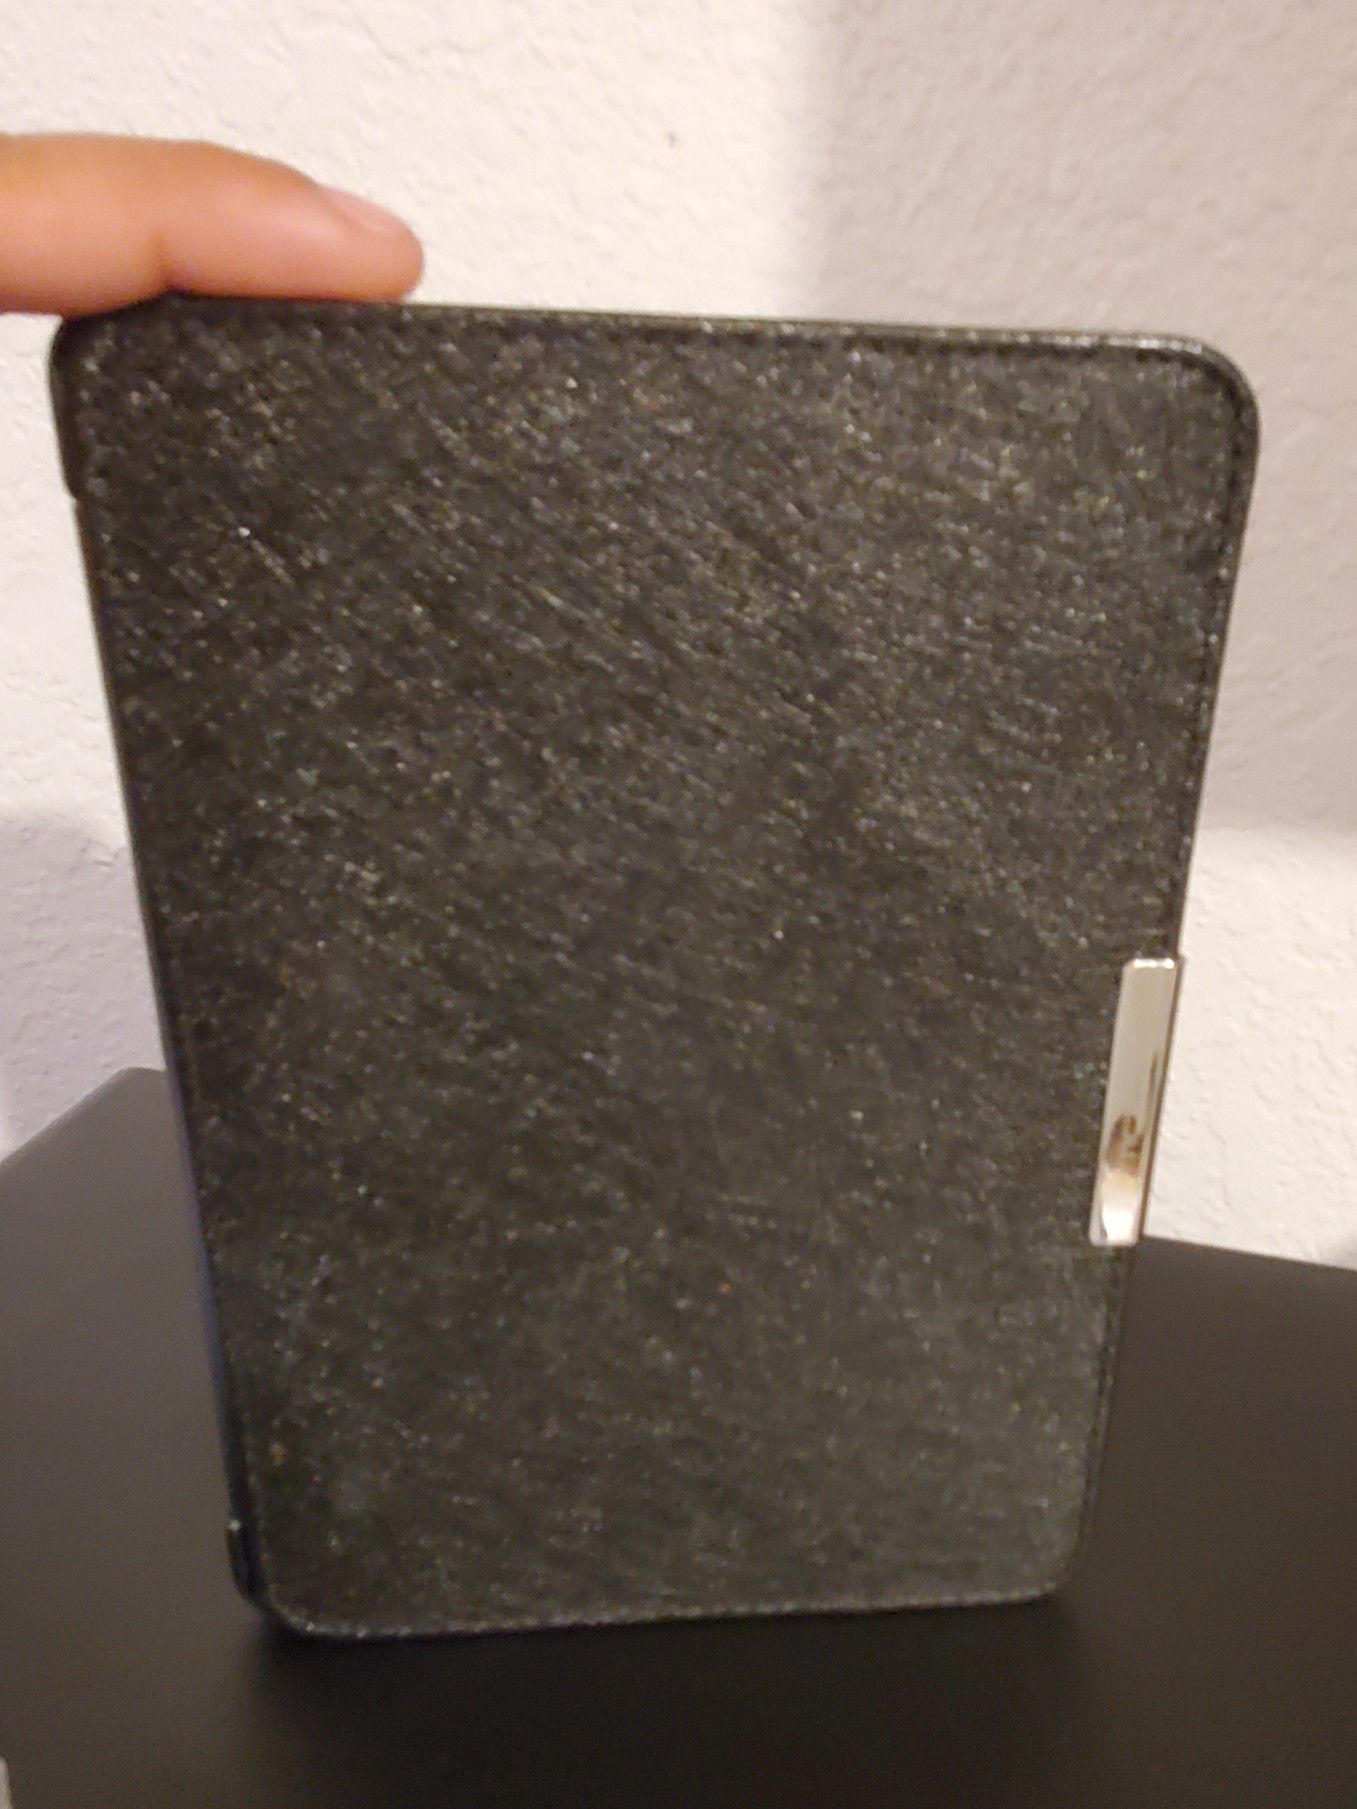 Case for kindle paperwhite k5